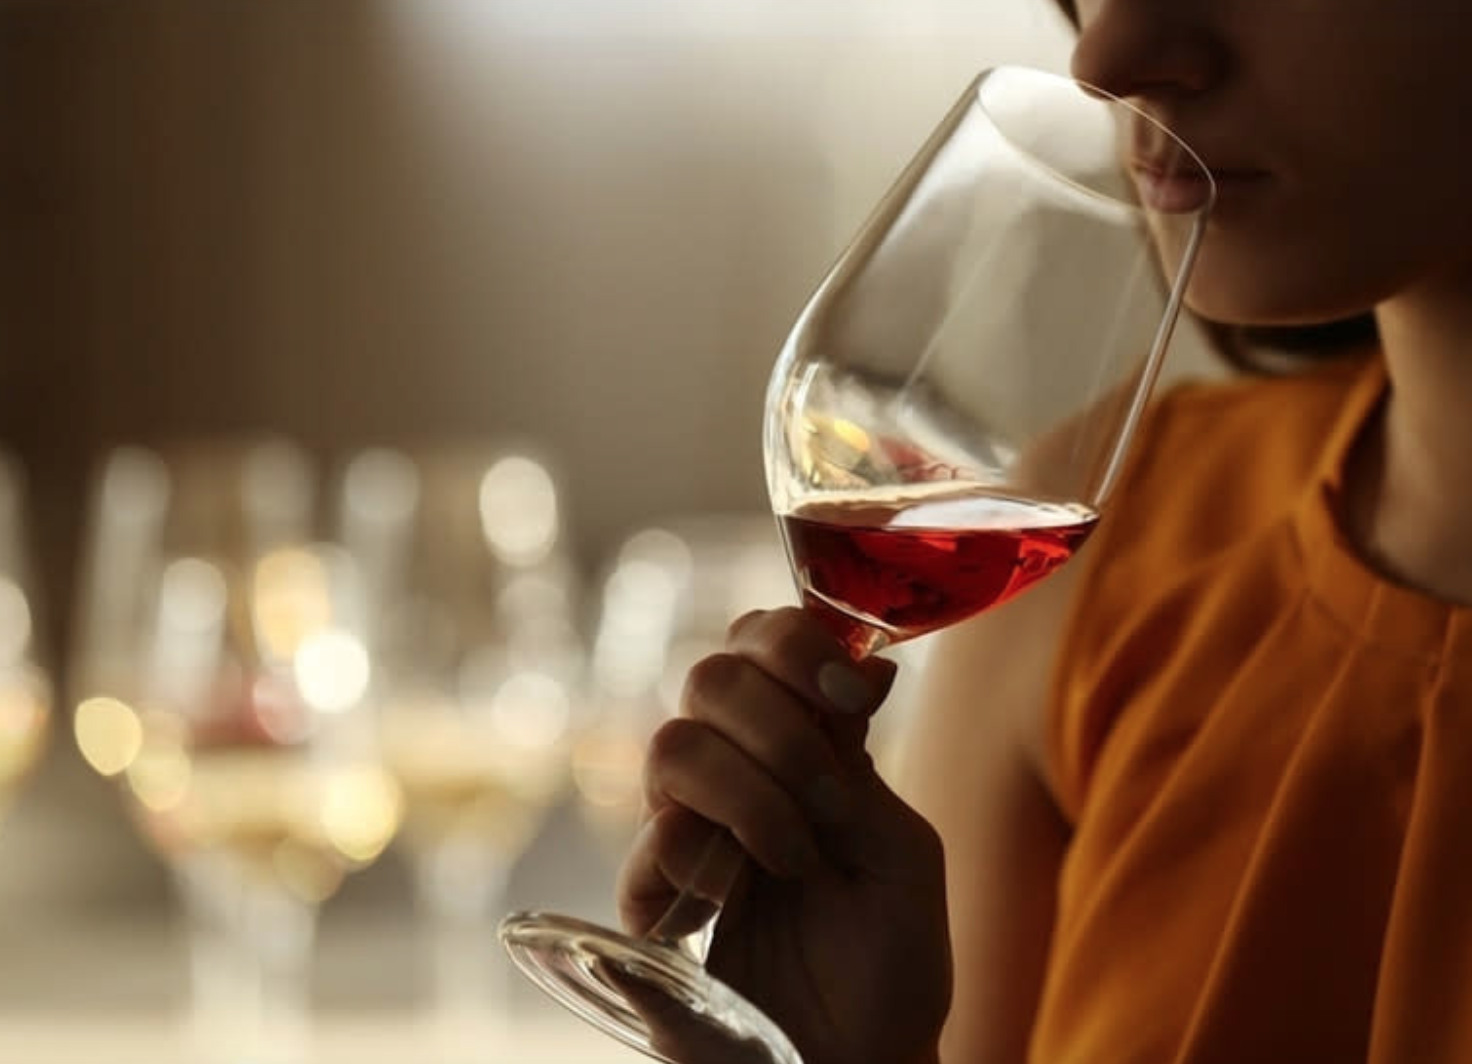 Choosing Your Ideal Wine When Dining Out